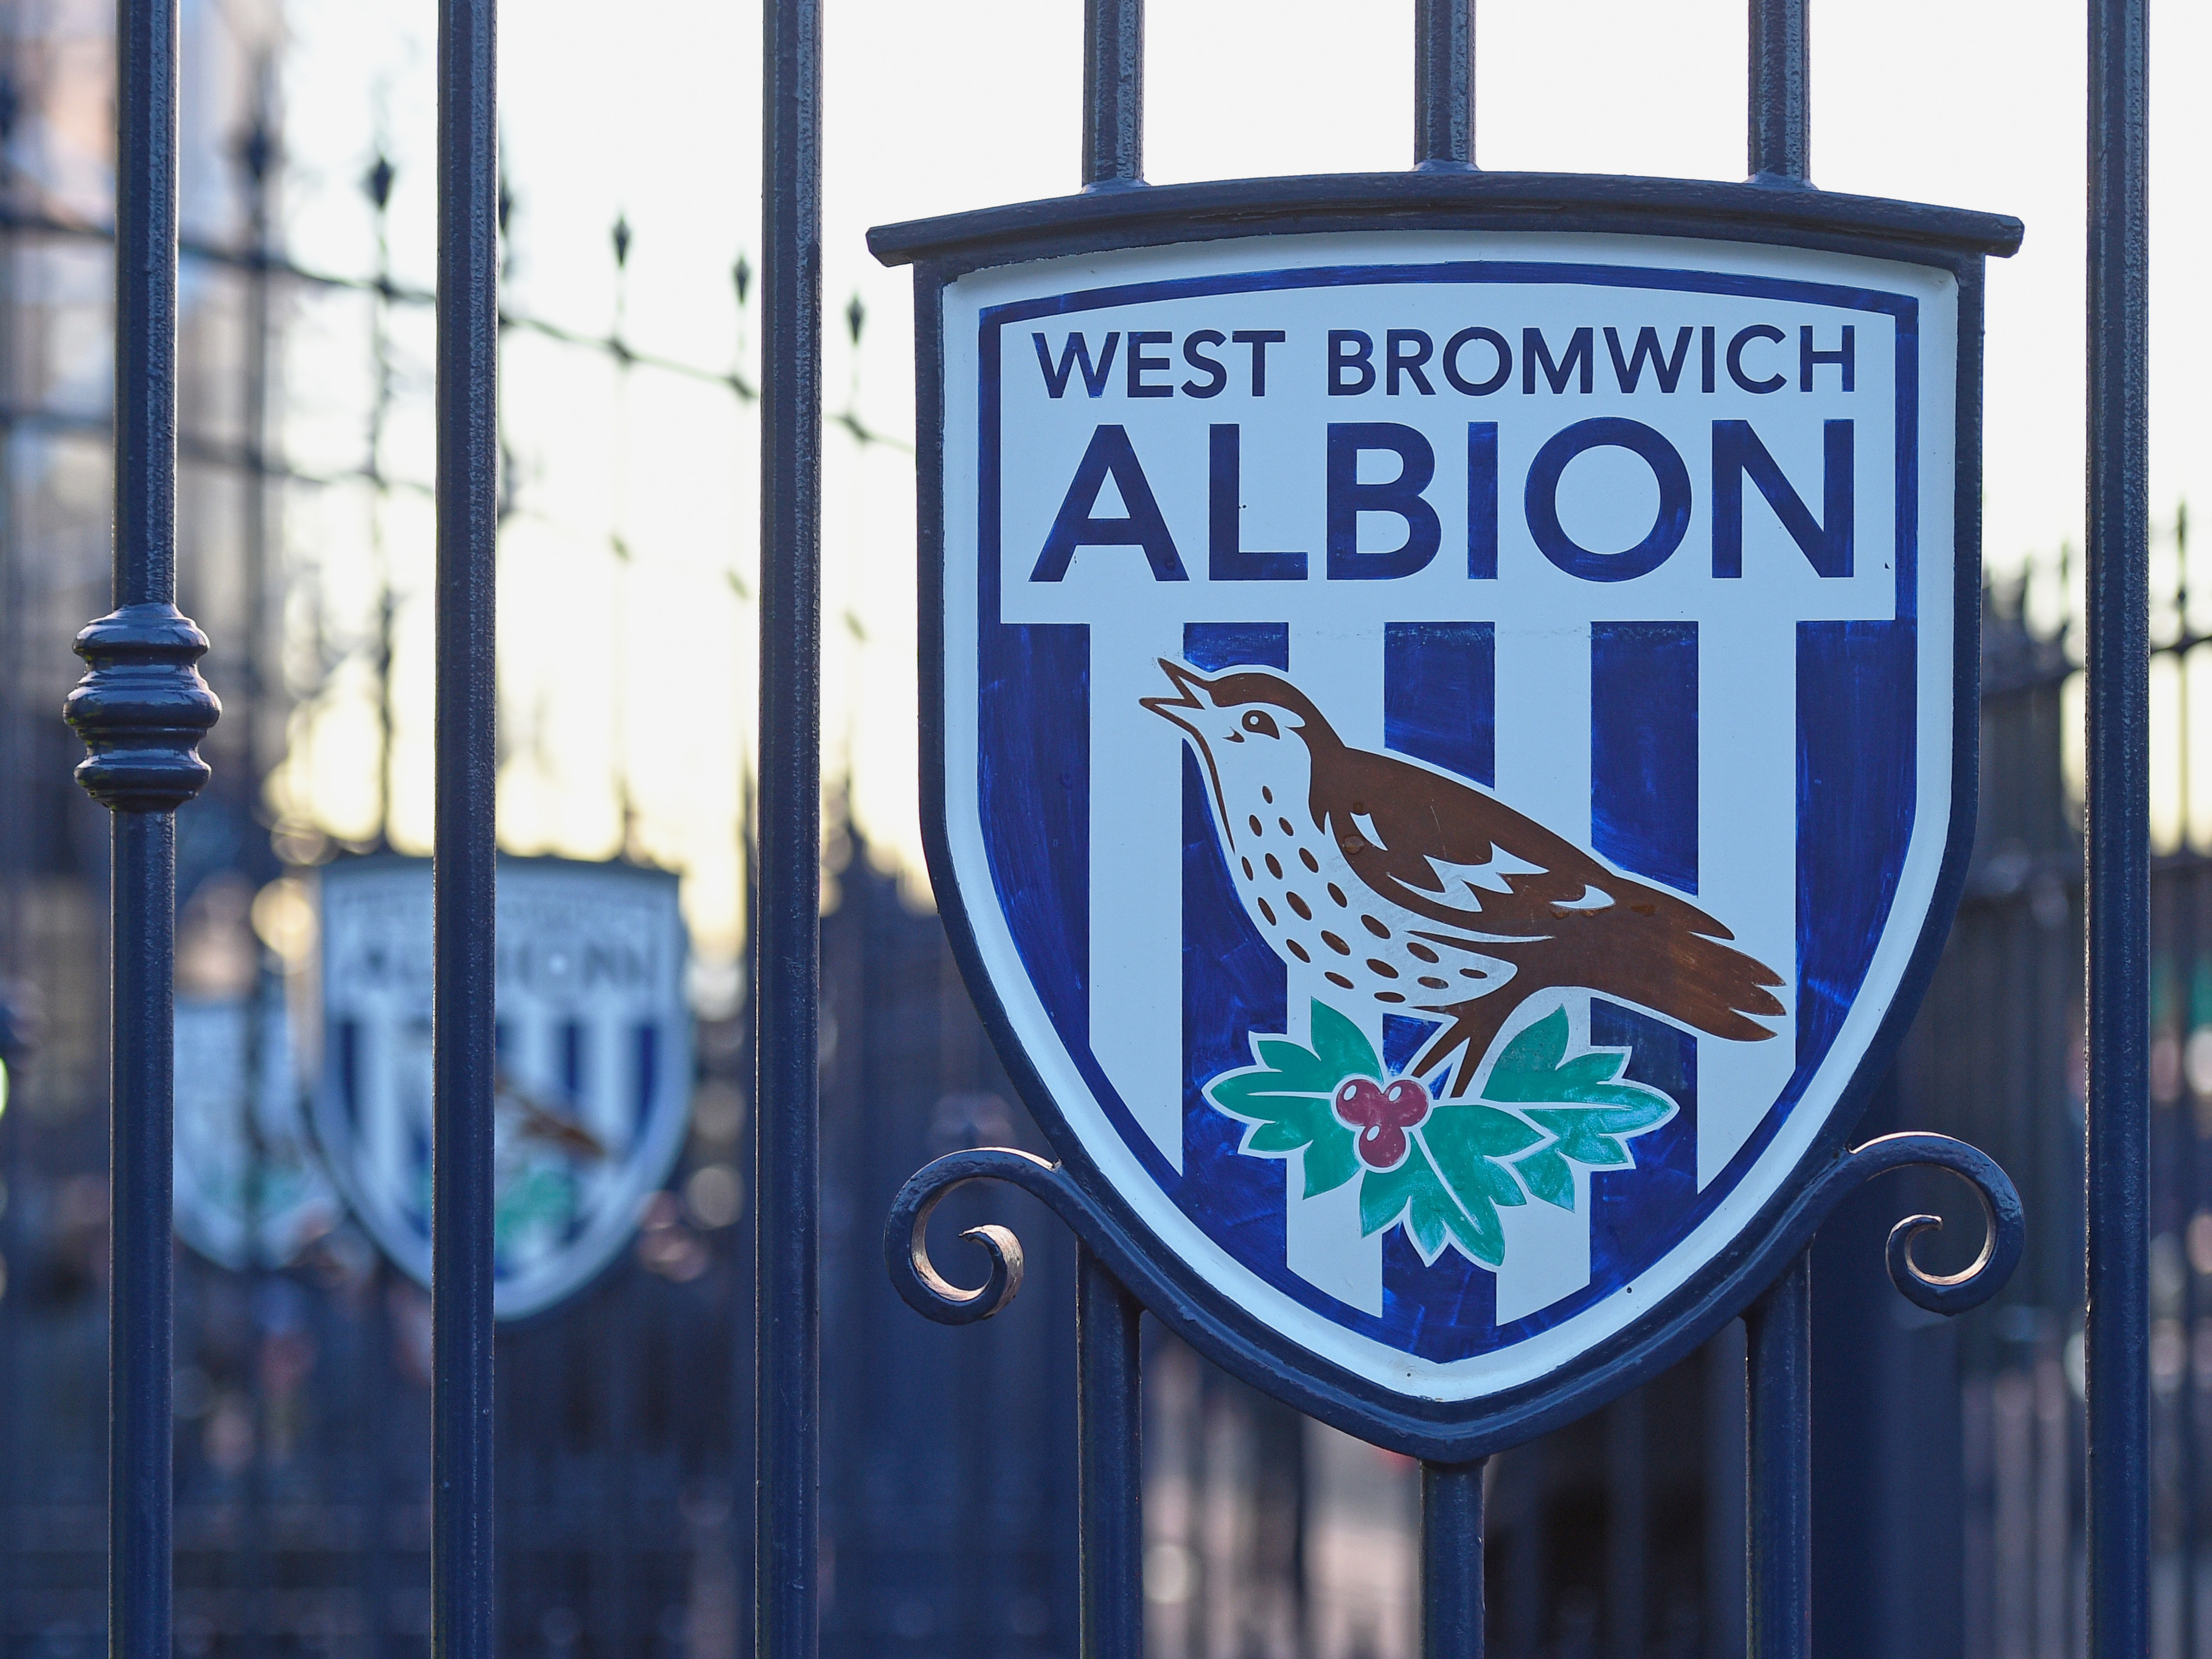 An image of the West Bromwich Albion badge outside the stadium